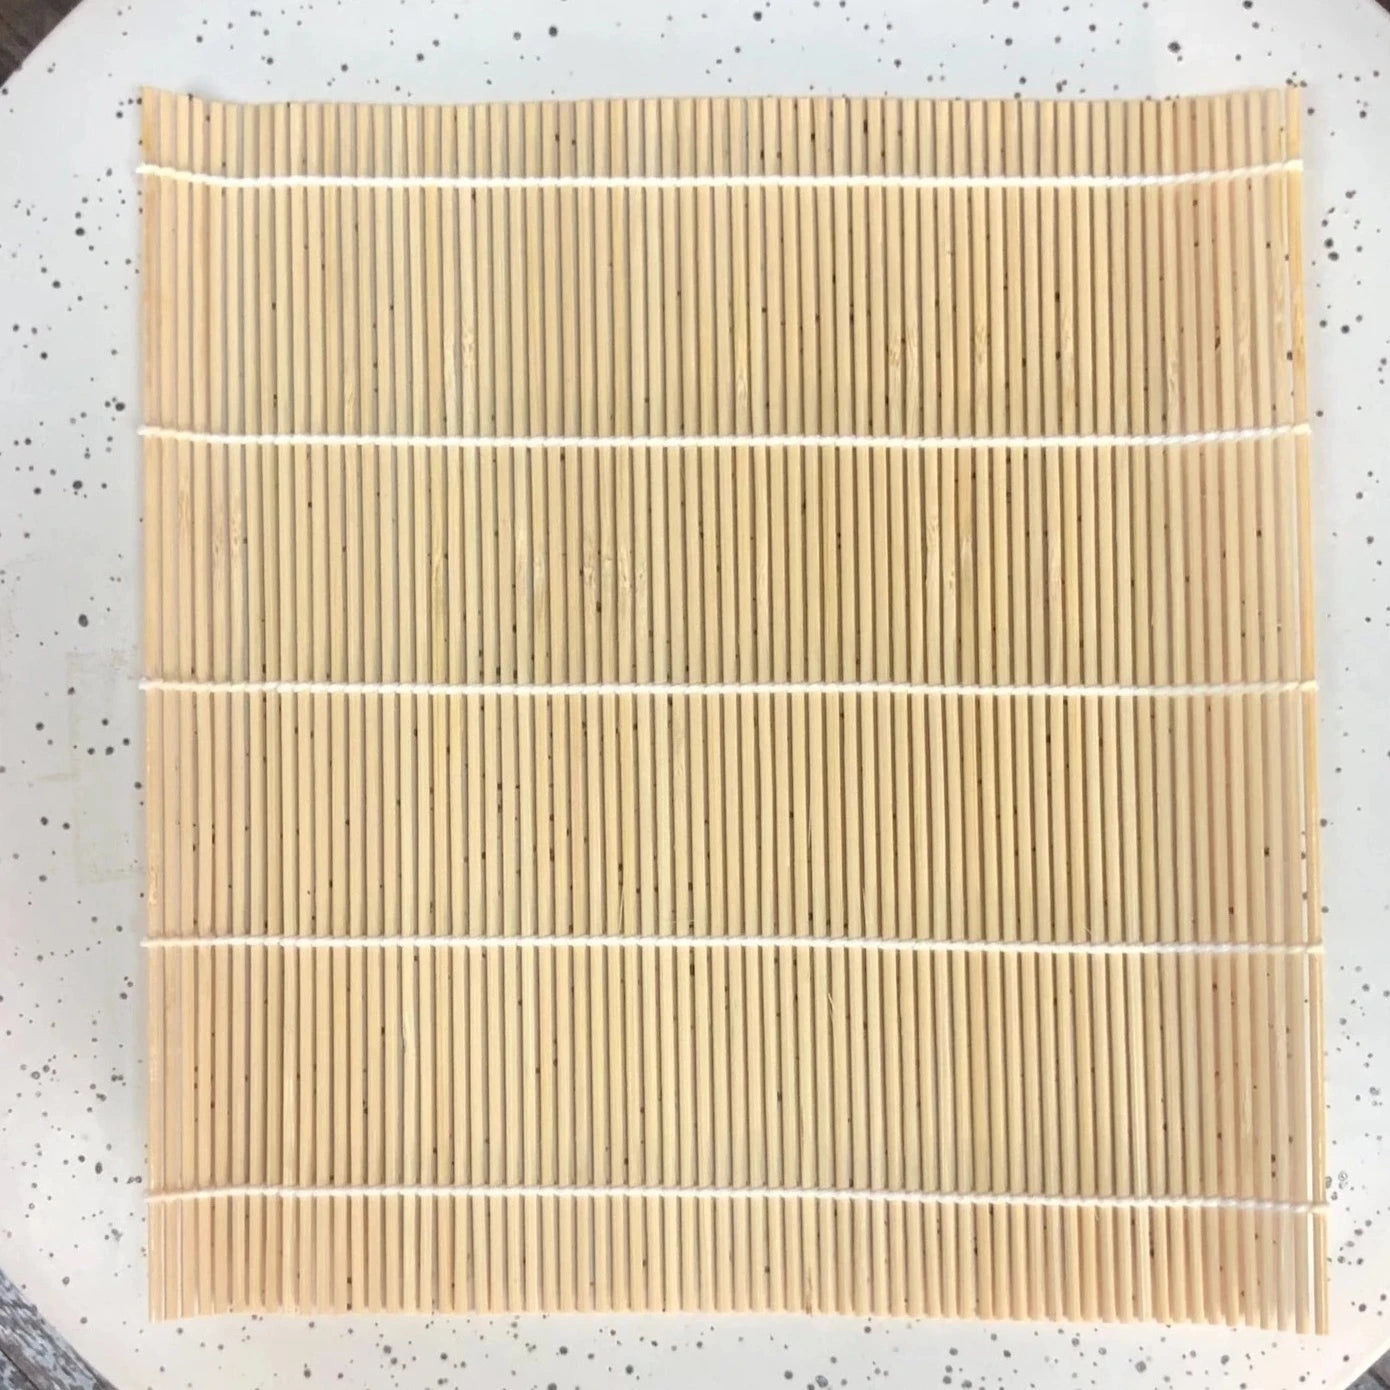 tan bamboo sushi mat on speckled plate